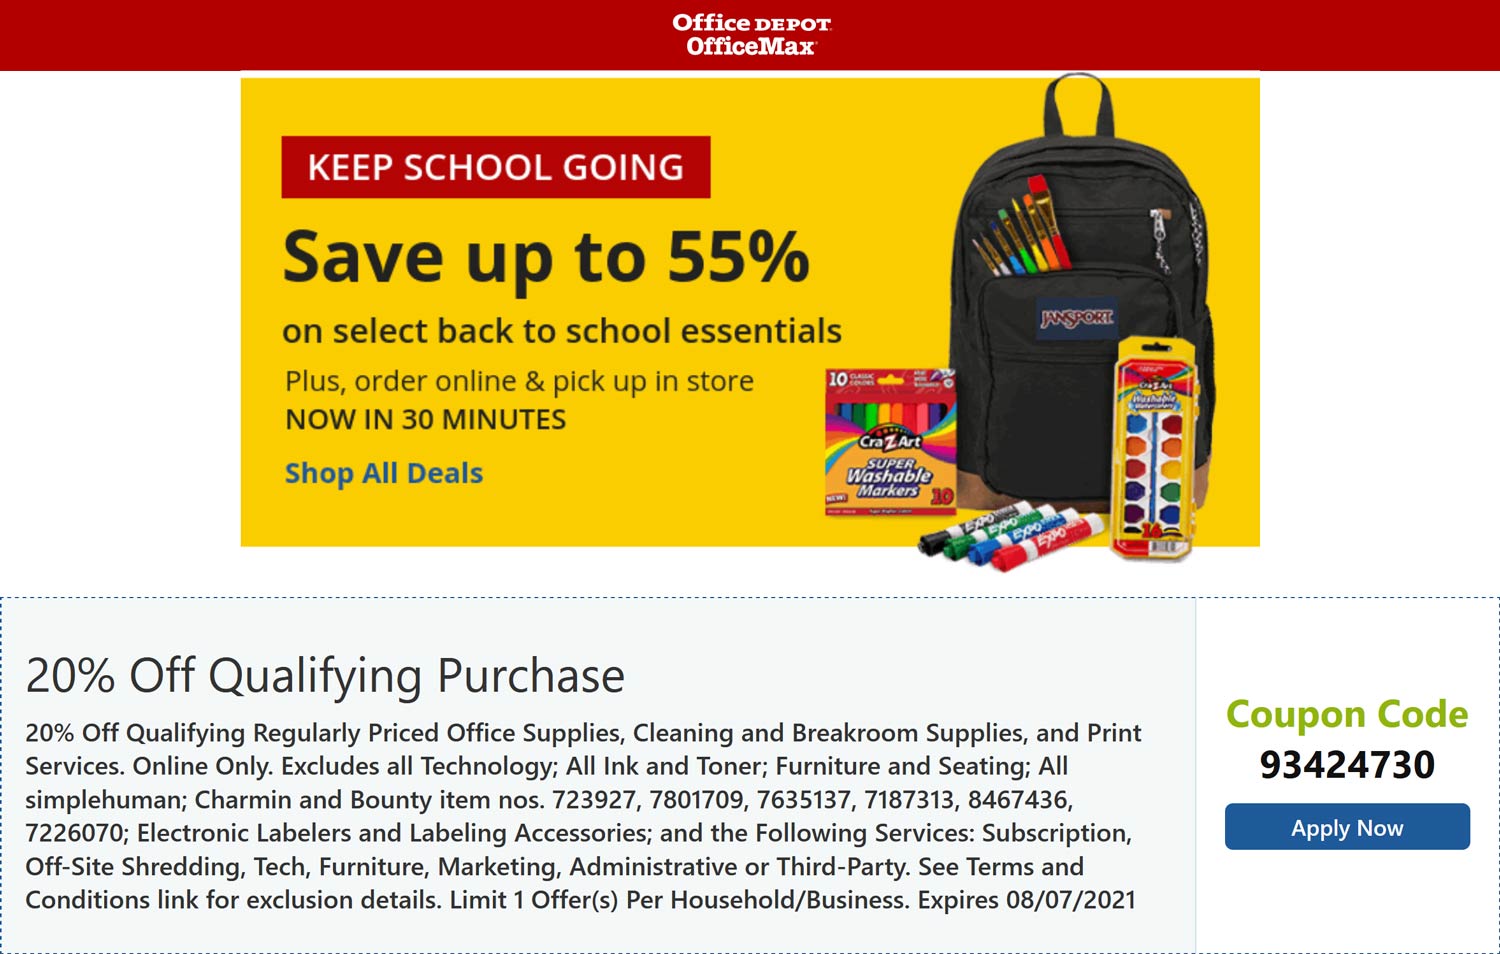 Office Depot stores Coupon  20% off at Office Depot Officemax via promo code 93424730 #officedepot 